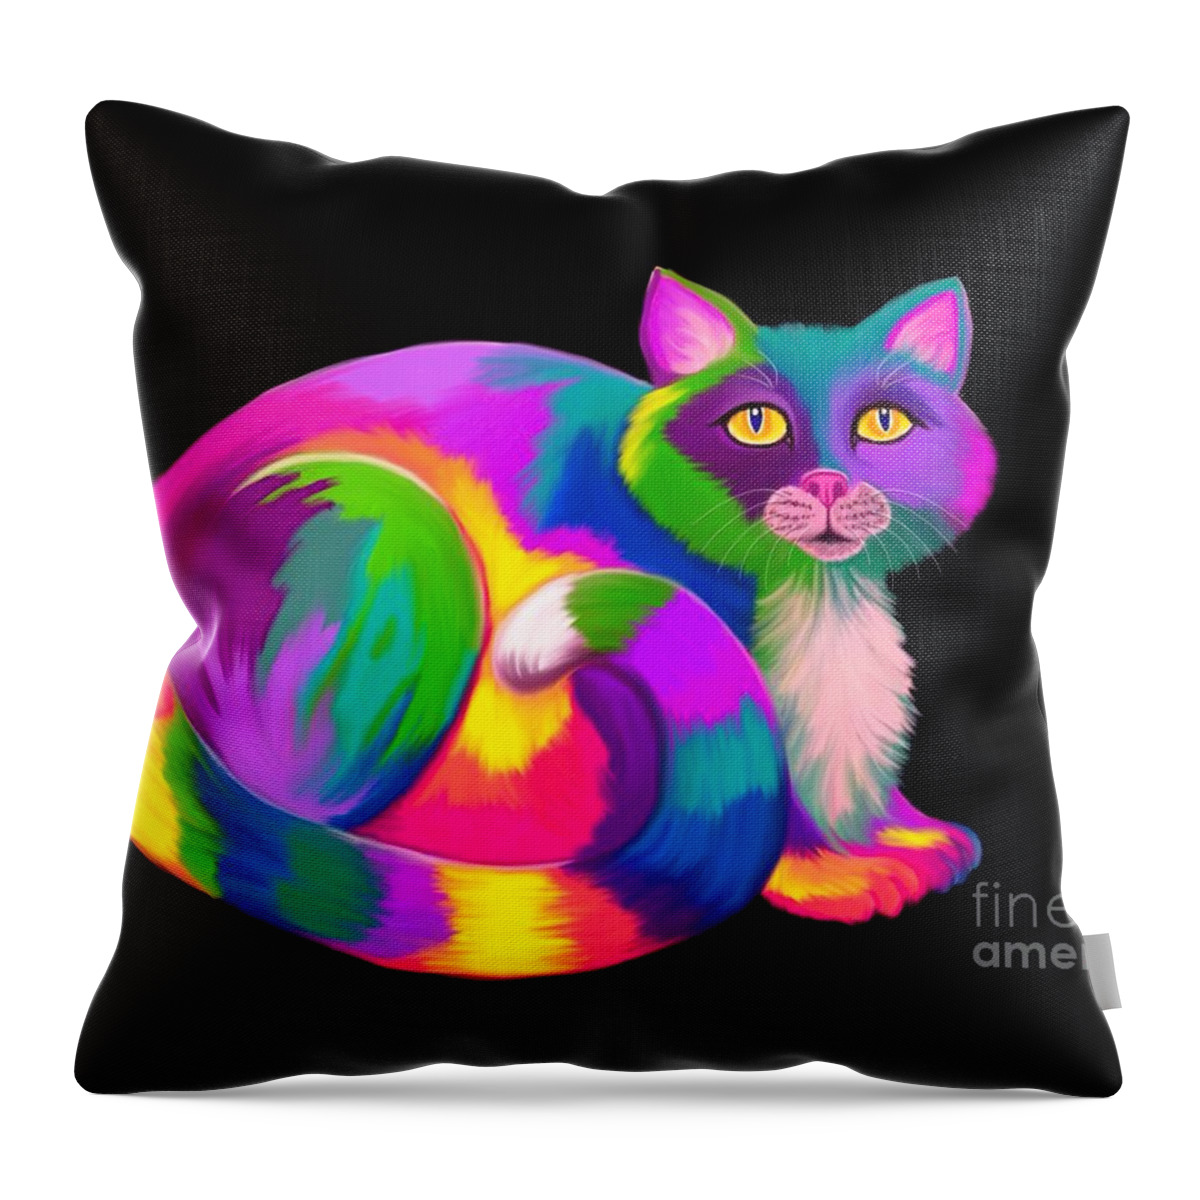 Colorful Cat Artwork Throw Pillow featuring the painting Neon Bright Cat by Nick Gustafson